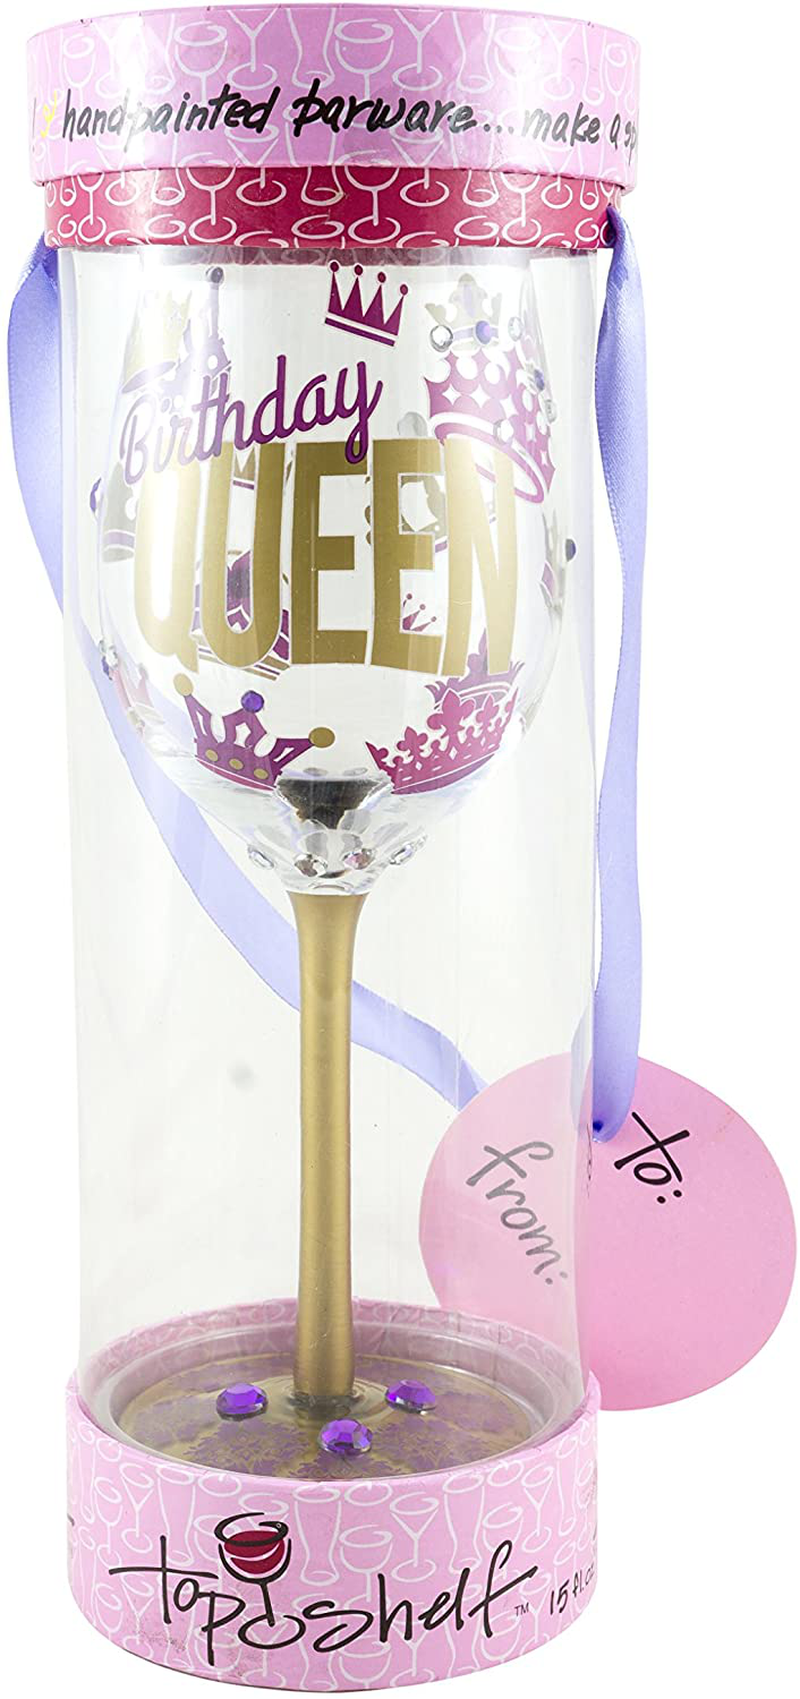 Top Shelf “Birthday Queen” Decorative Wine Glass ; Funny Gifts for Women ; Hand Painted Purple and Gold Design ; Unique Red or White Wine Glasses